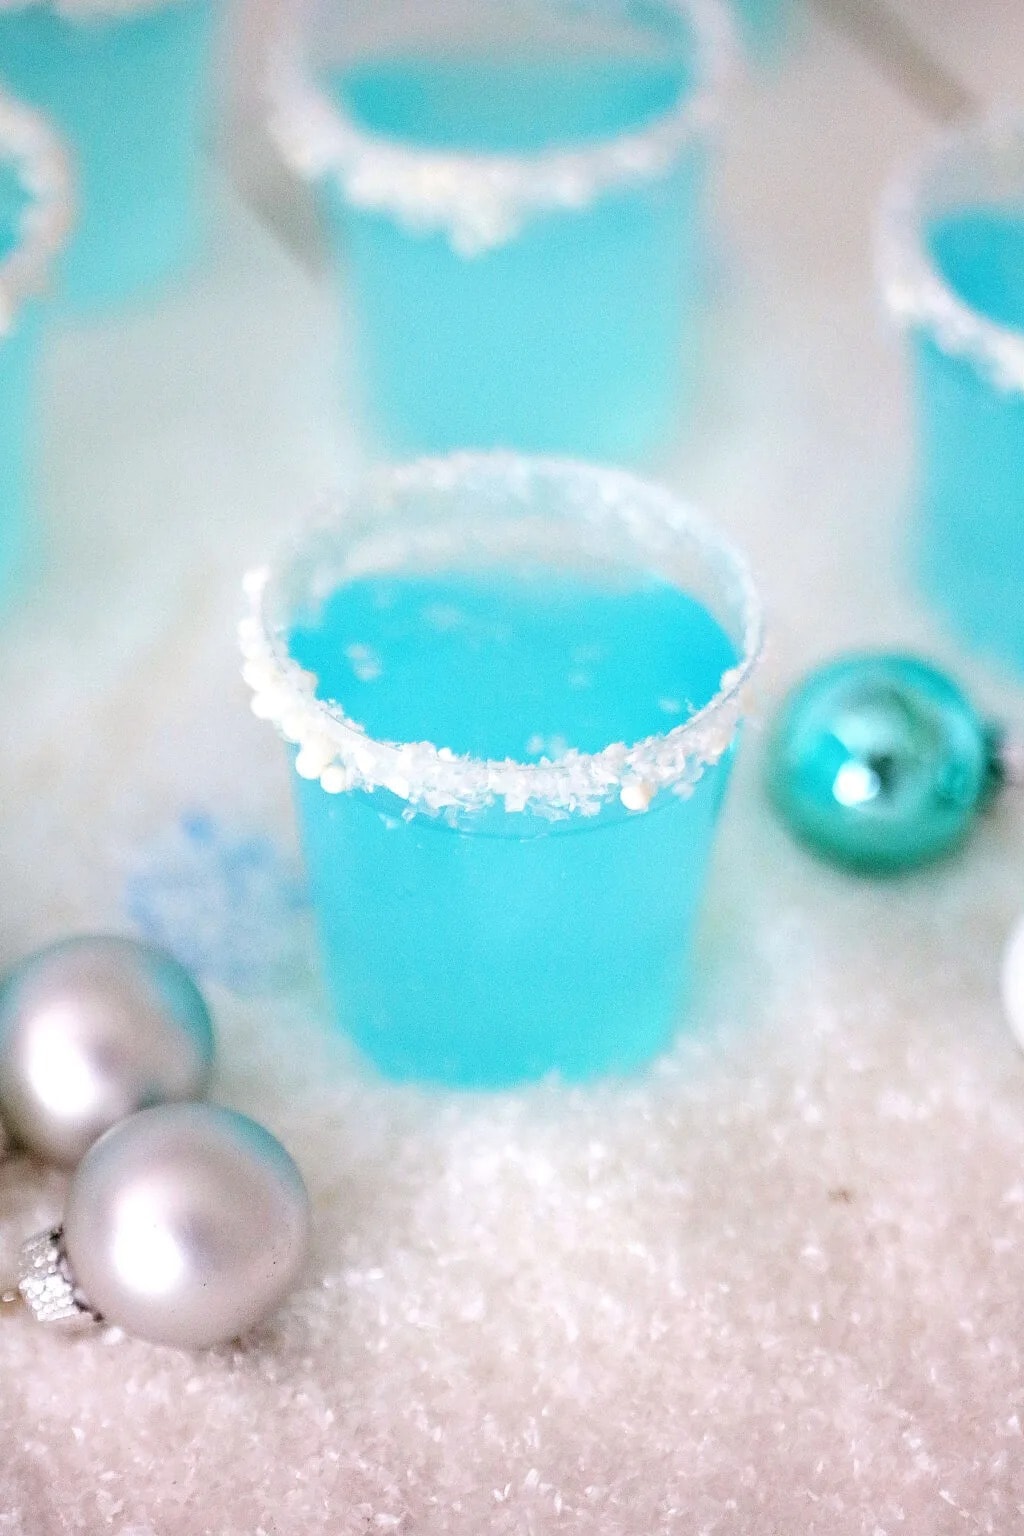 Blue Jello shots on sprinkle candies-rimmed plastic cups on holiday table. 